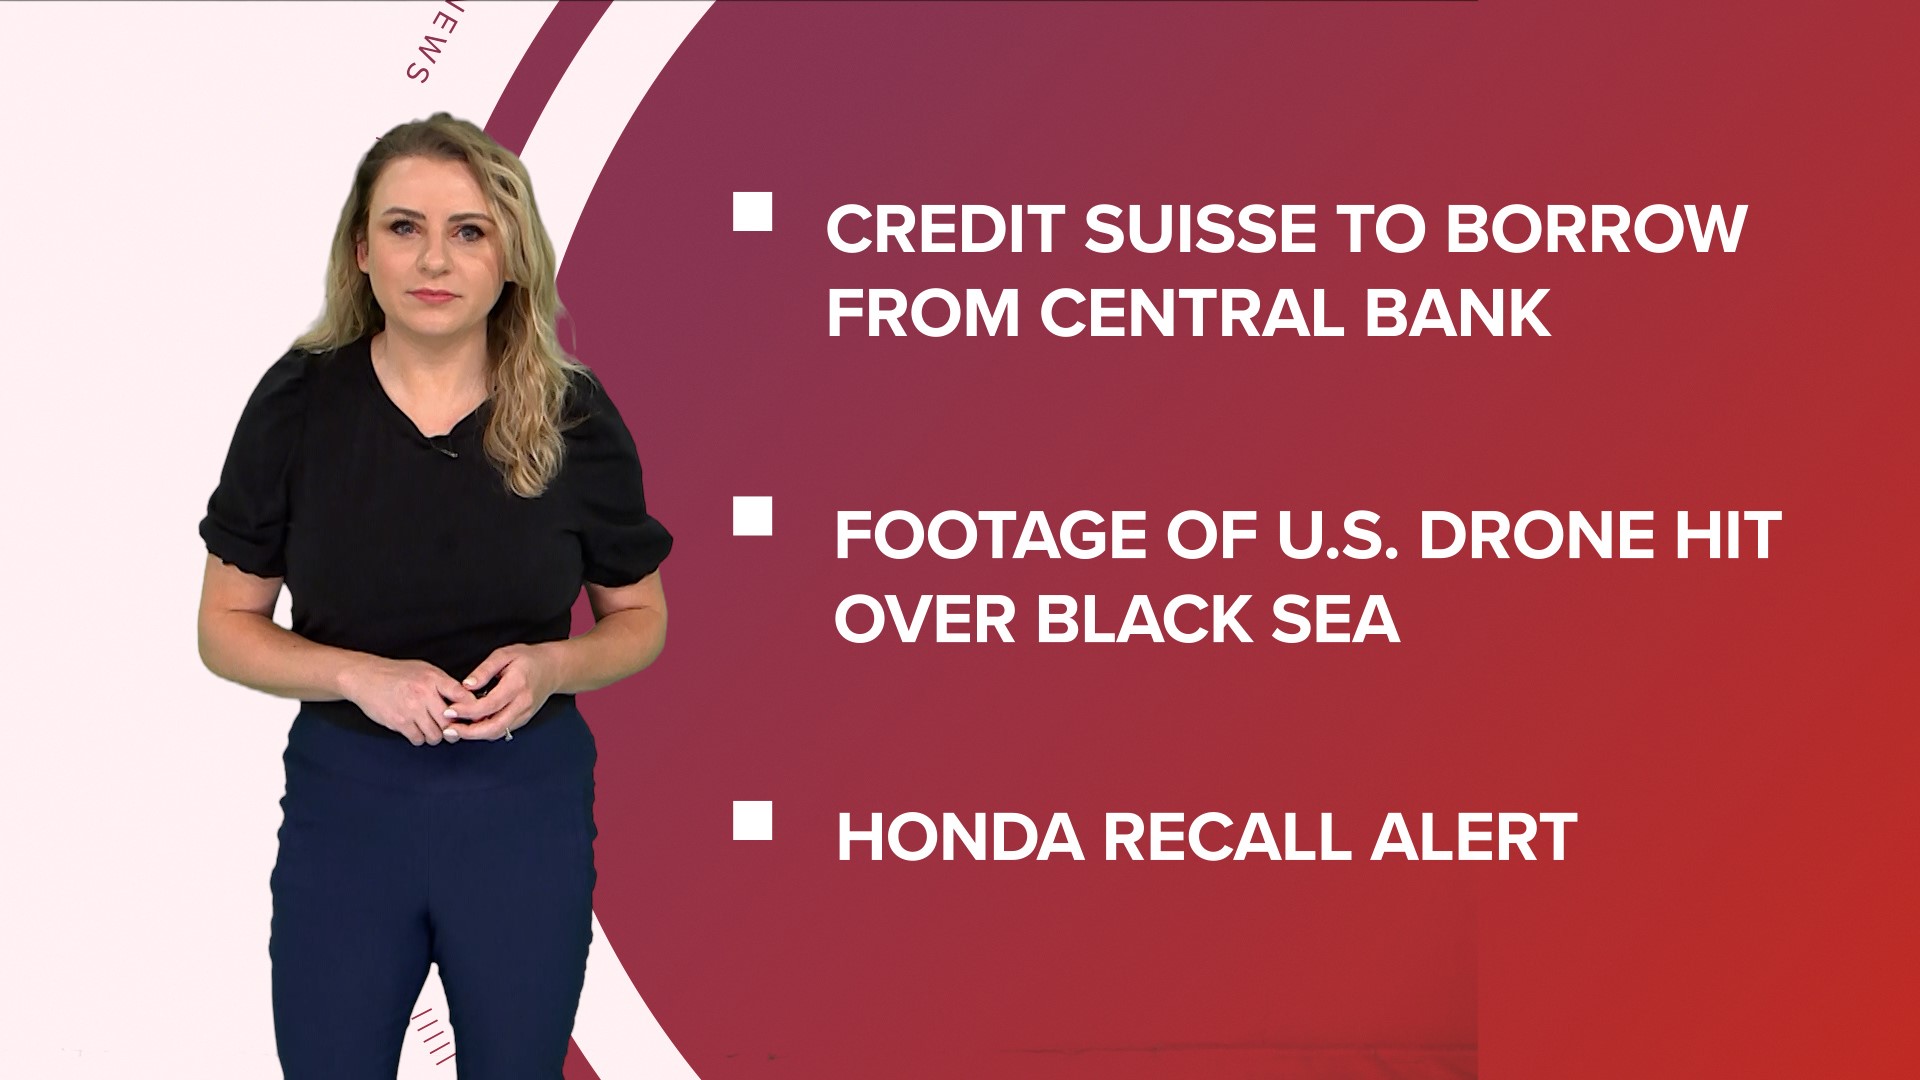 A look at what is happening in the news from footage released of a US drone being hit by Russian jets to a Honda recall and a new favorite dog breed.